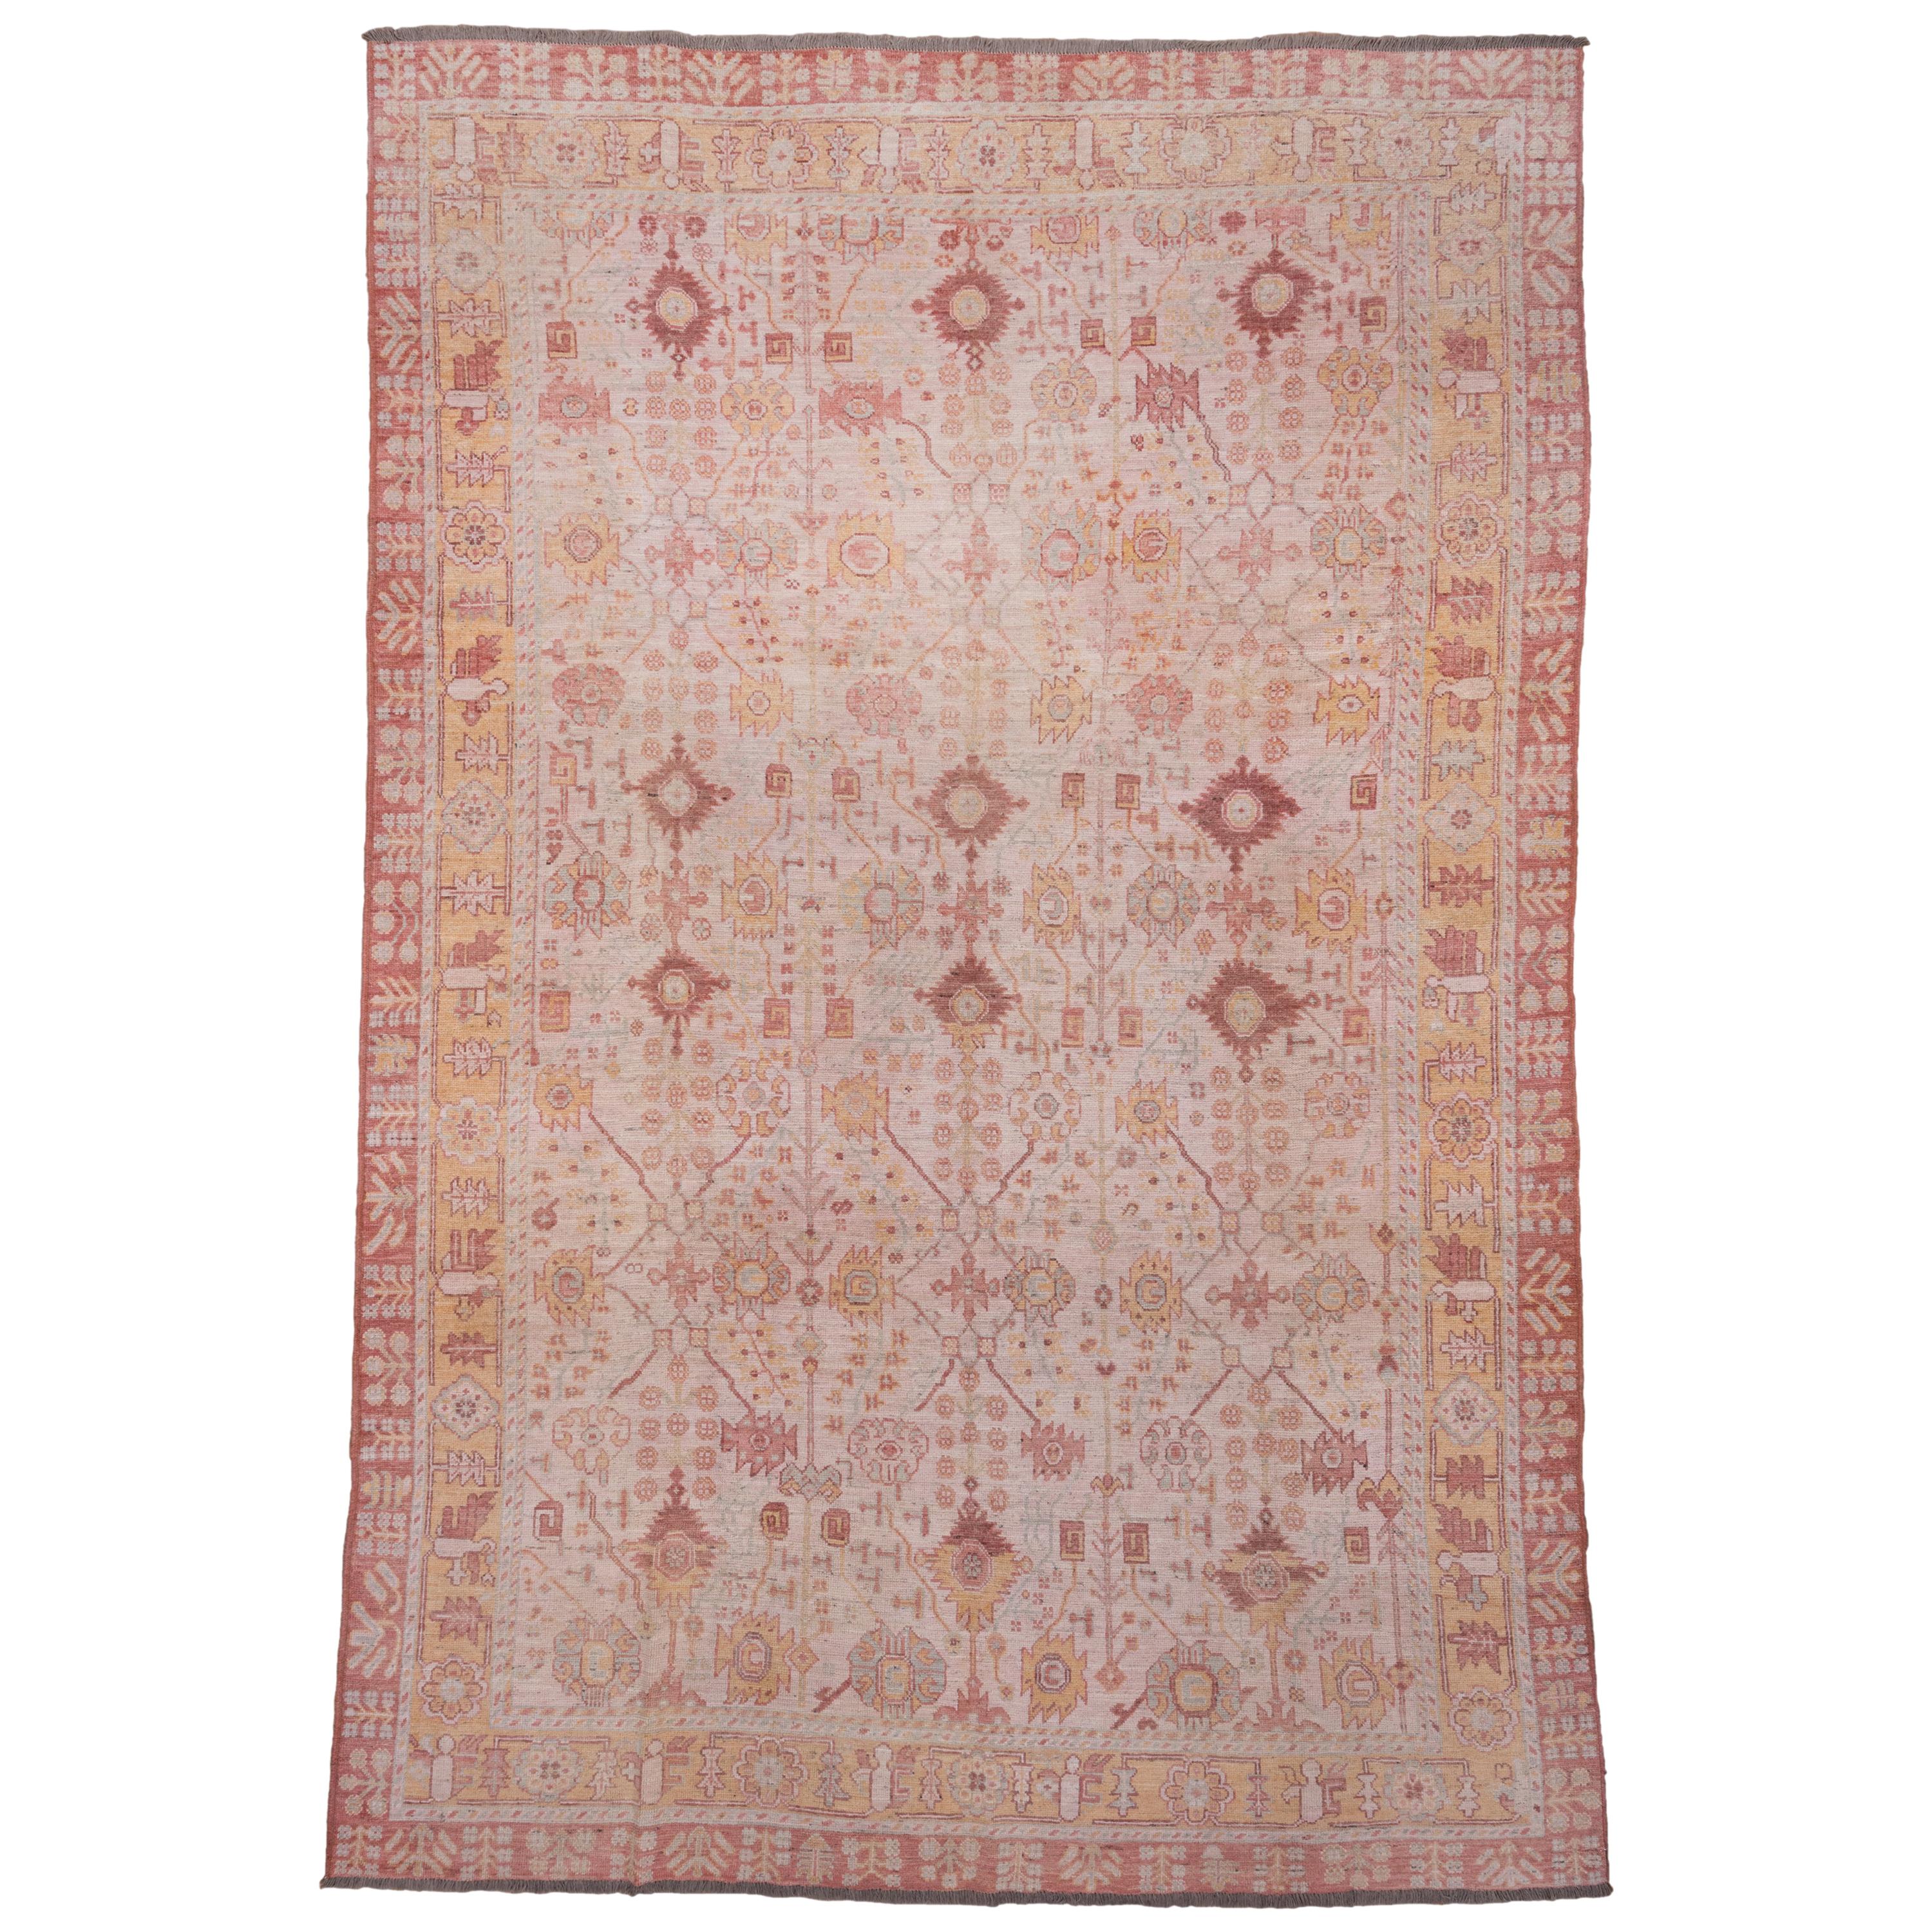 Handknotted Oushak Design Rug, Pink Allover FIeid, Zanaki Colorful Double Border For Sale